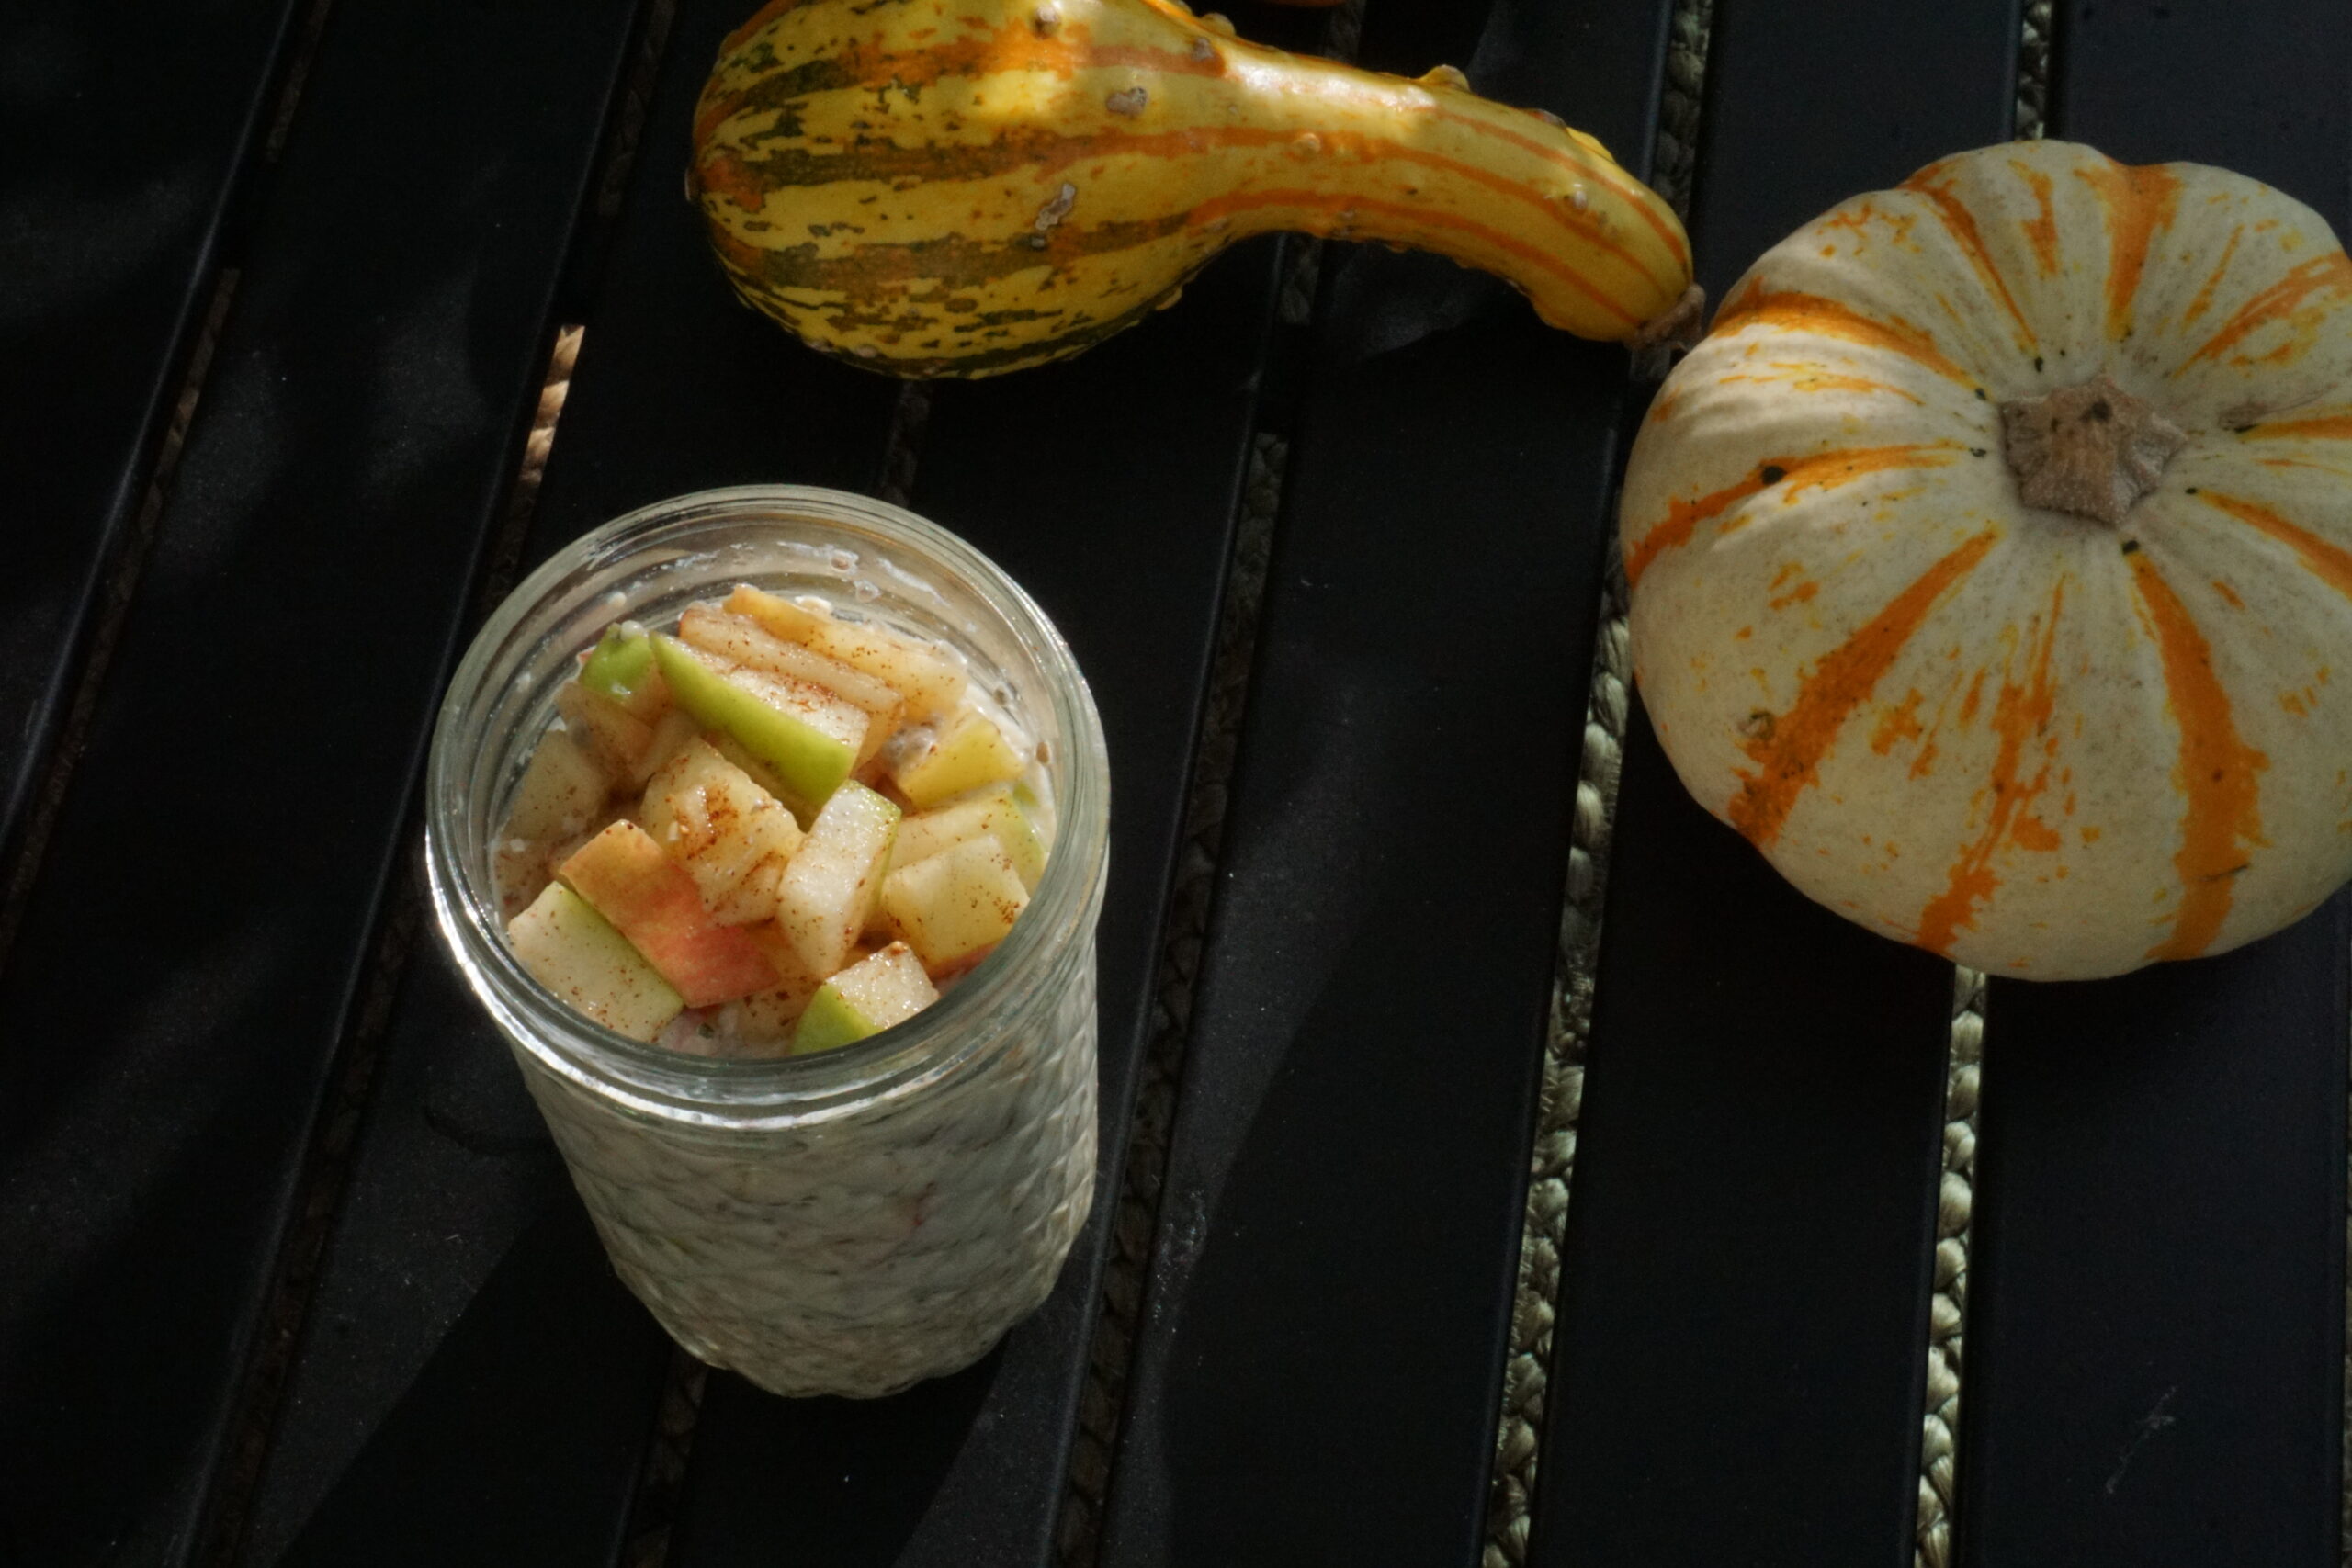 An Ode to Autumn: Fall in Love with this Overnight Oats Recipe